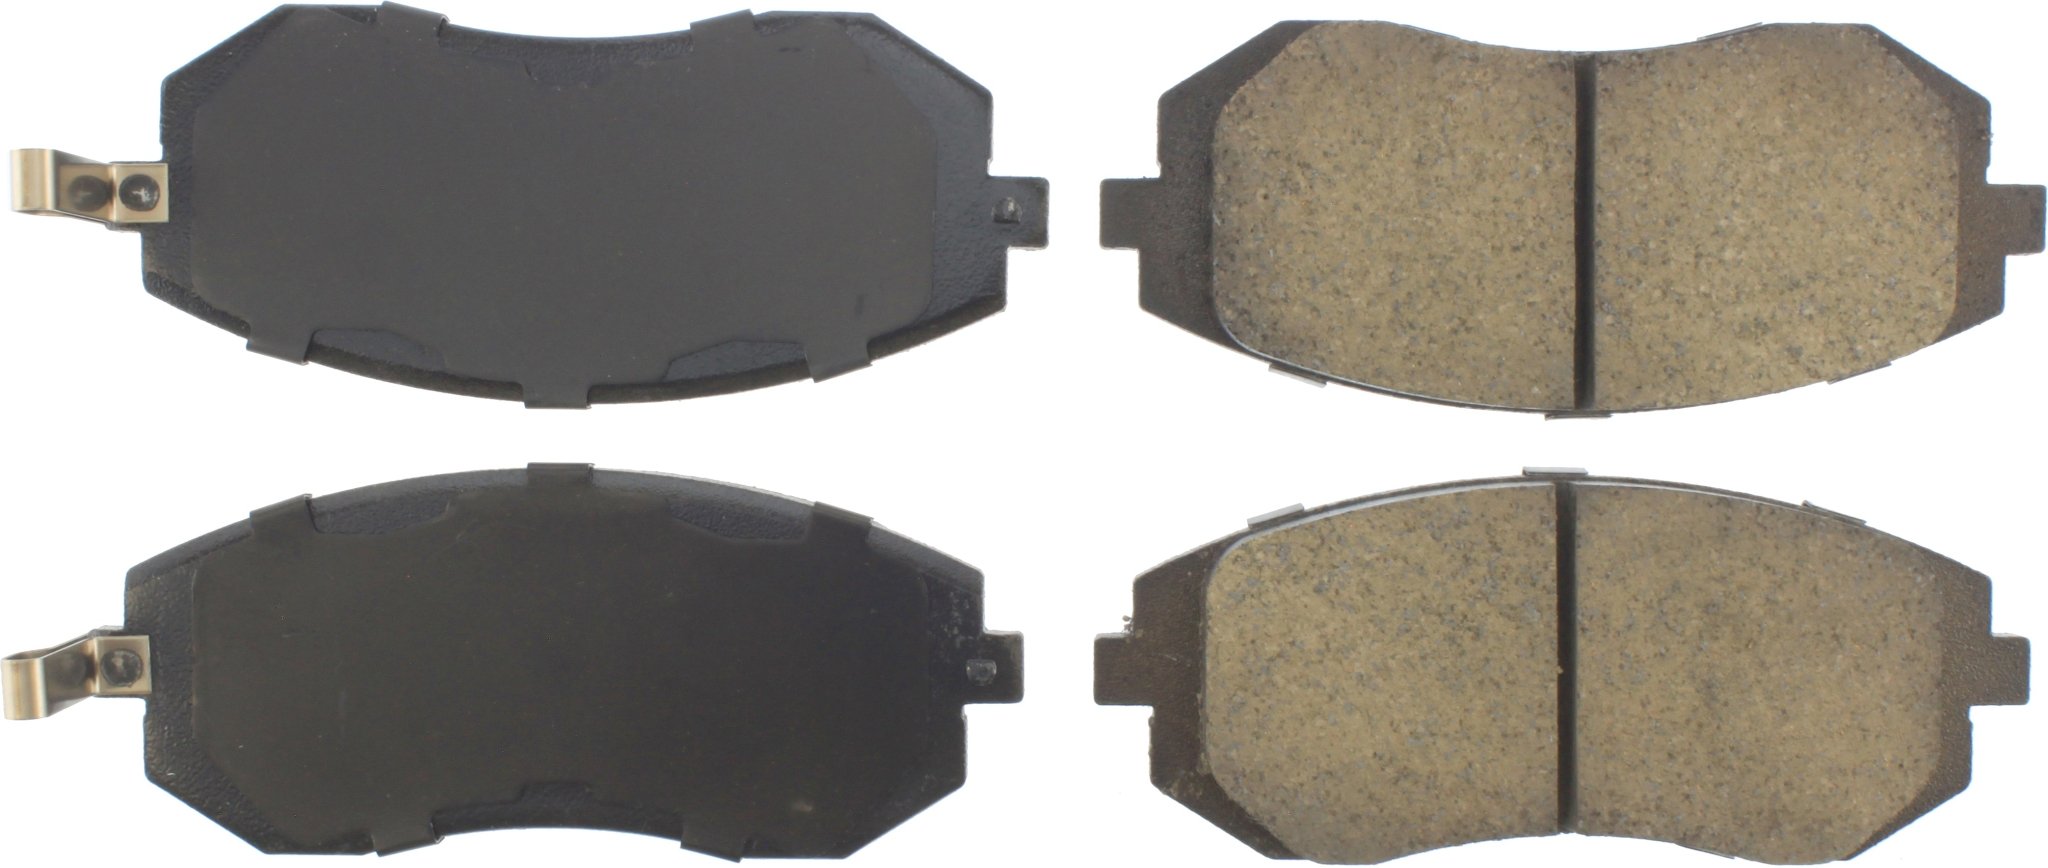 StopTech Street Select Front Brake Pads Subaru WRX 2003-2005 / Forester 2003-2010 - Dirty Racing Products